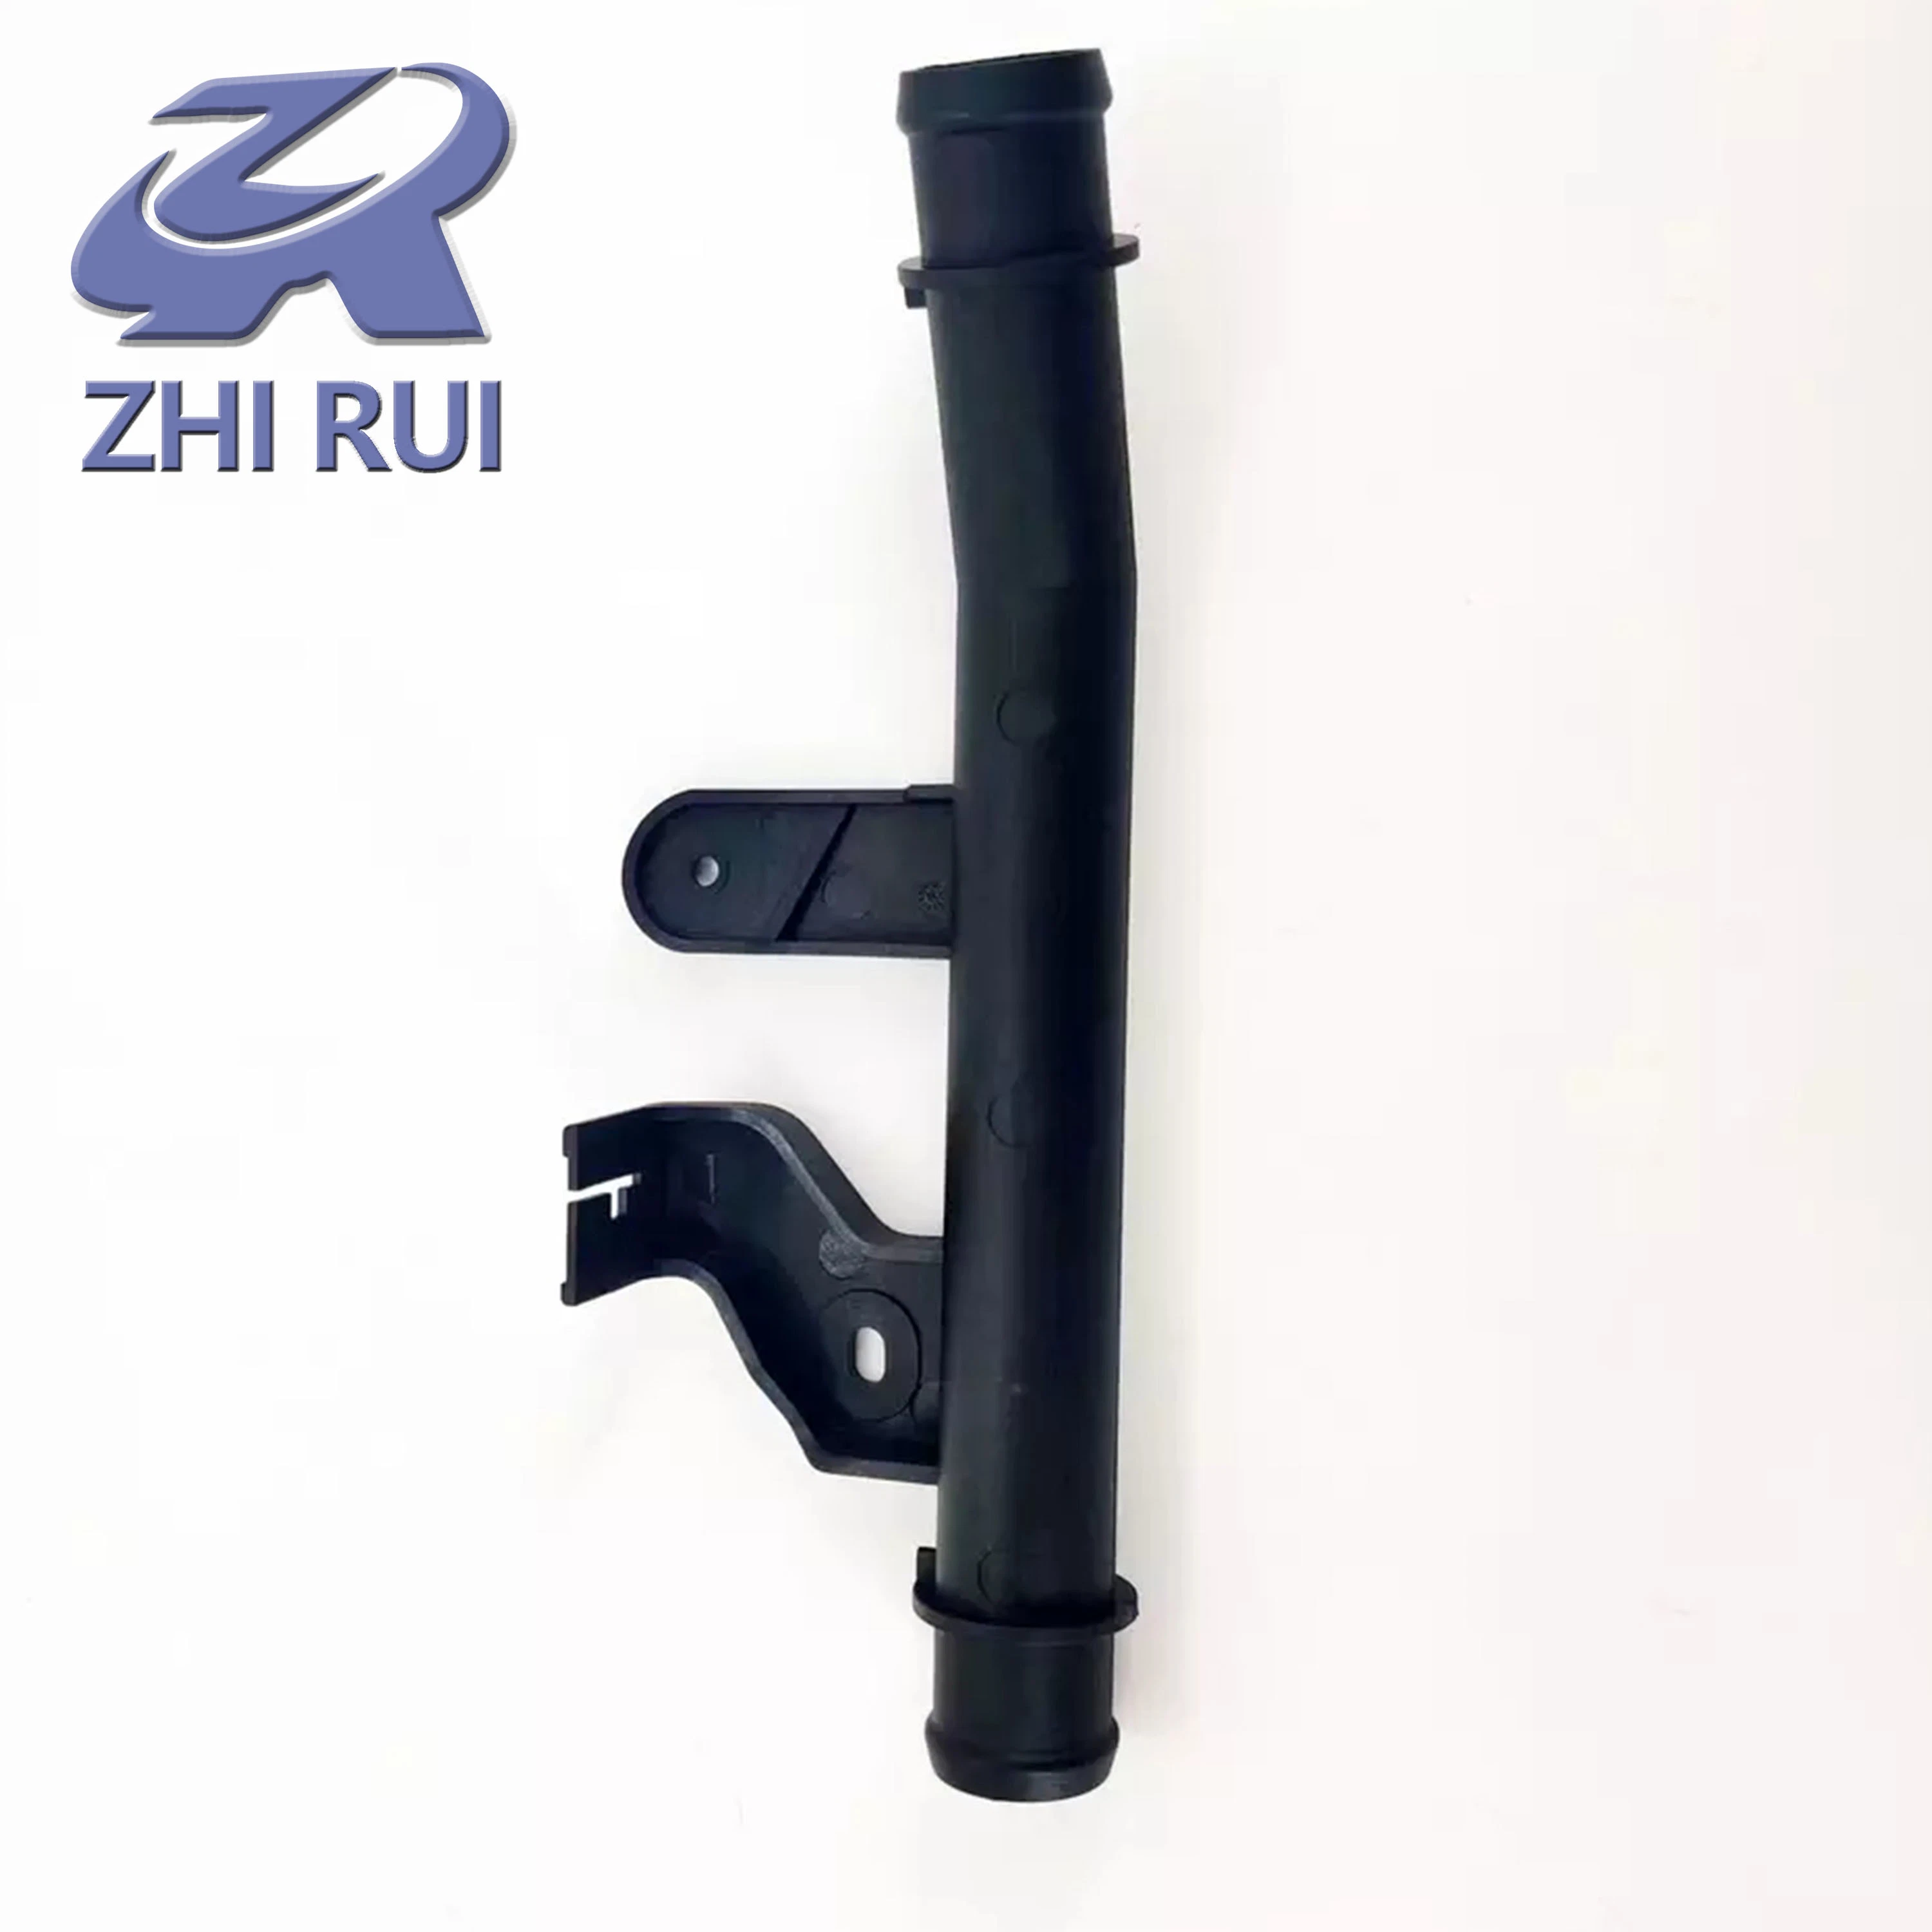 Auto Engine Radiator Coolant Hose Structure Cooling System Water Pipe for Auto Parts Xf 2.0t Xf 2.0t Sportbrake OEM C2z15507